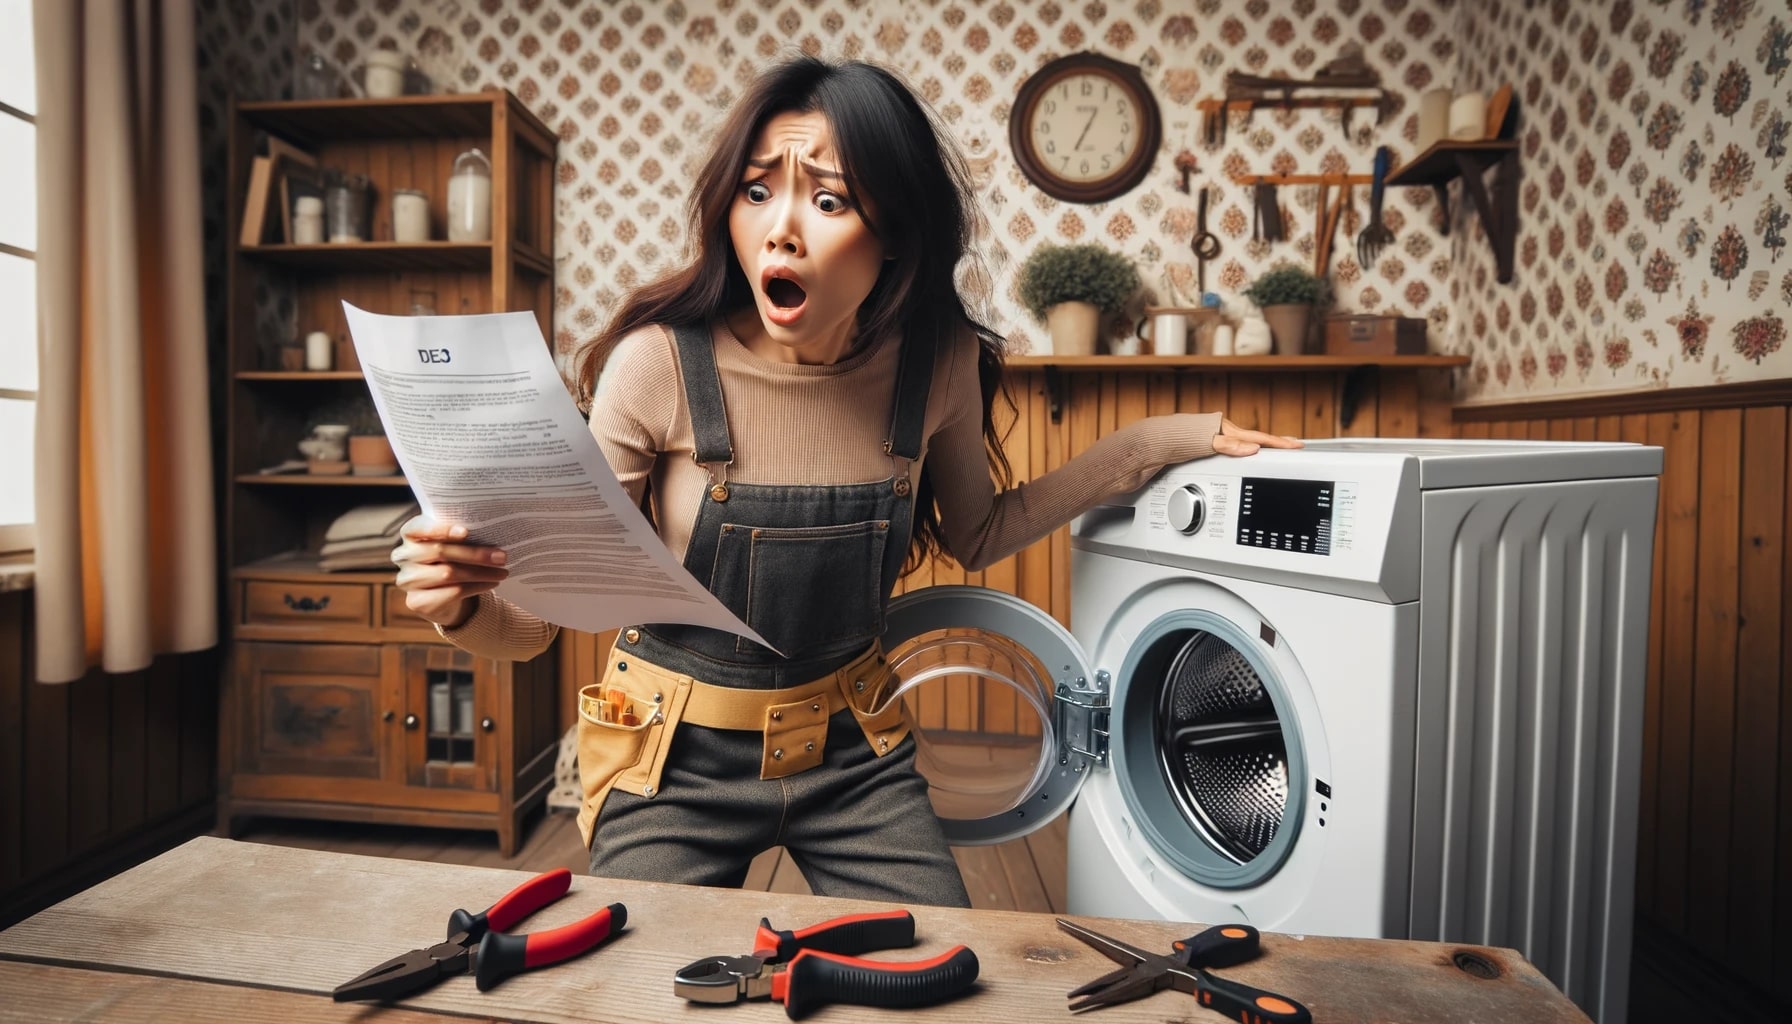 Photo of a desperate young Asian woman in work clothes, frantically looking at a washing machine manual in a cottage room. The walls are adorned with vintage wallpapers, and there's a wooden table with tools spread out.